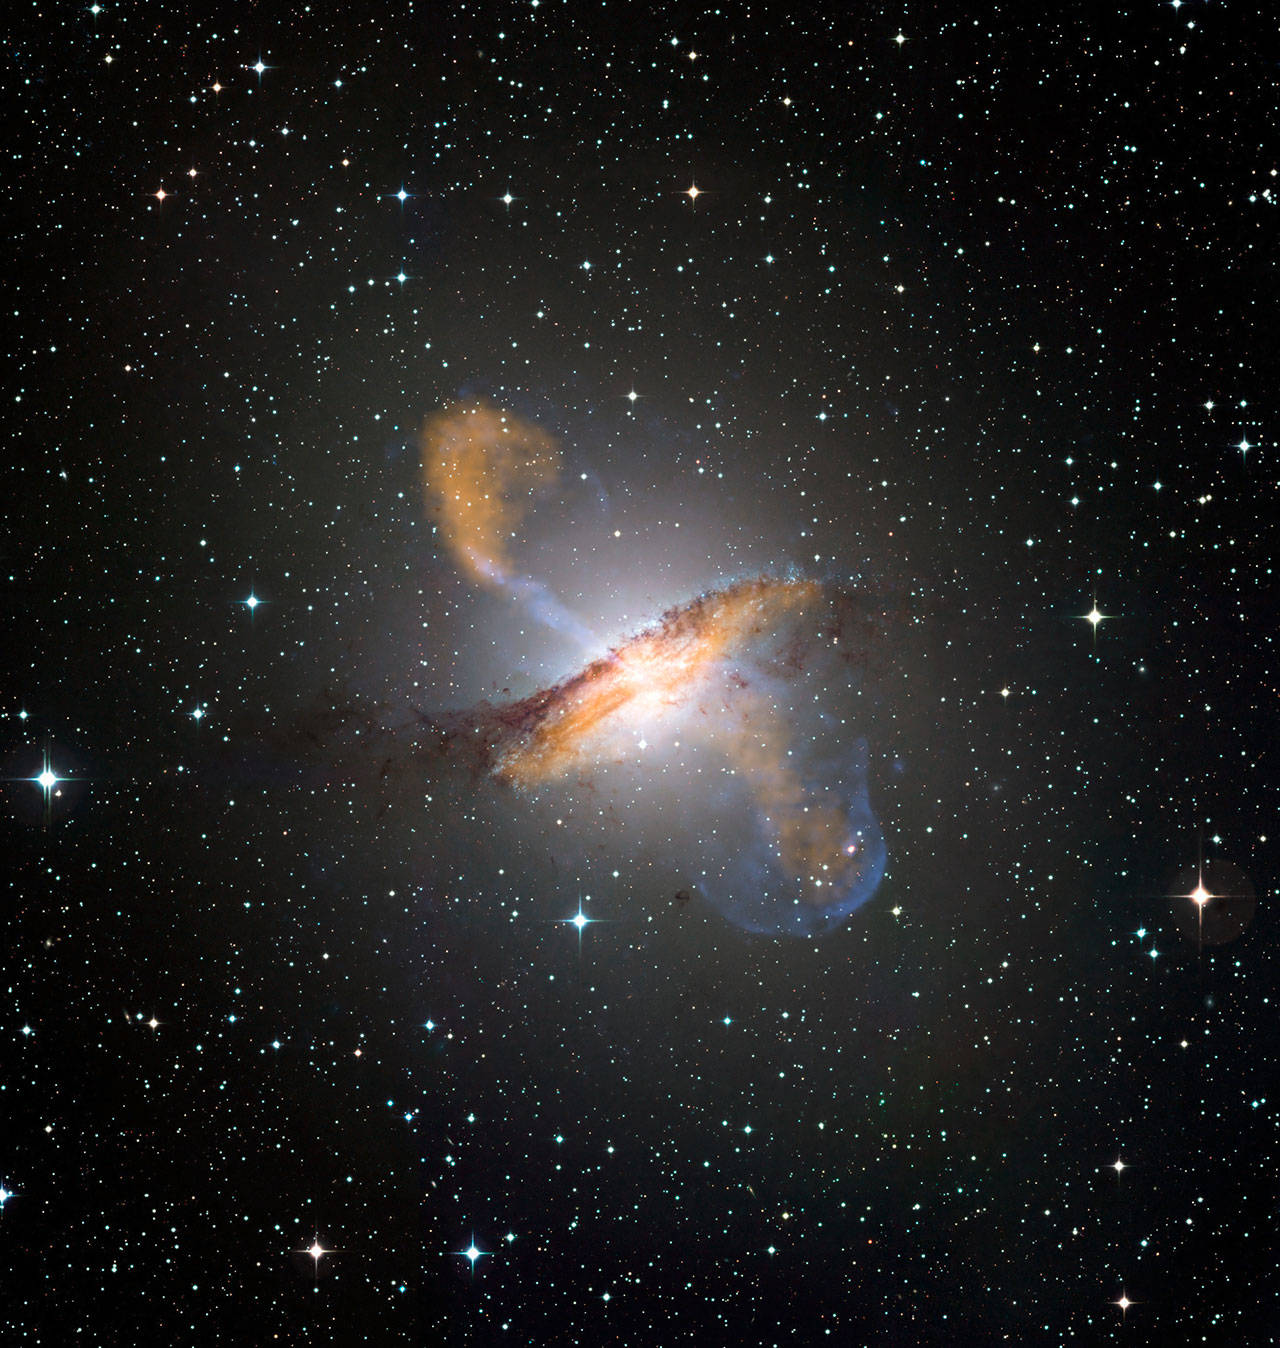 An image of Centaurus A, revealing the lobes and jets emanating from the active galaxy’s central black hole. (Photo courtesy of ESO/NASA)